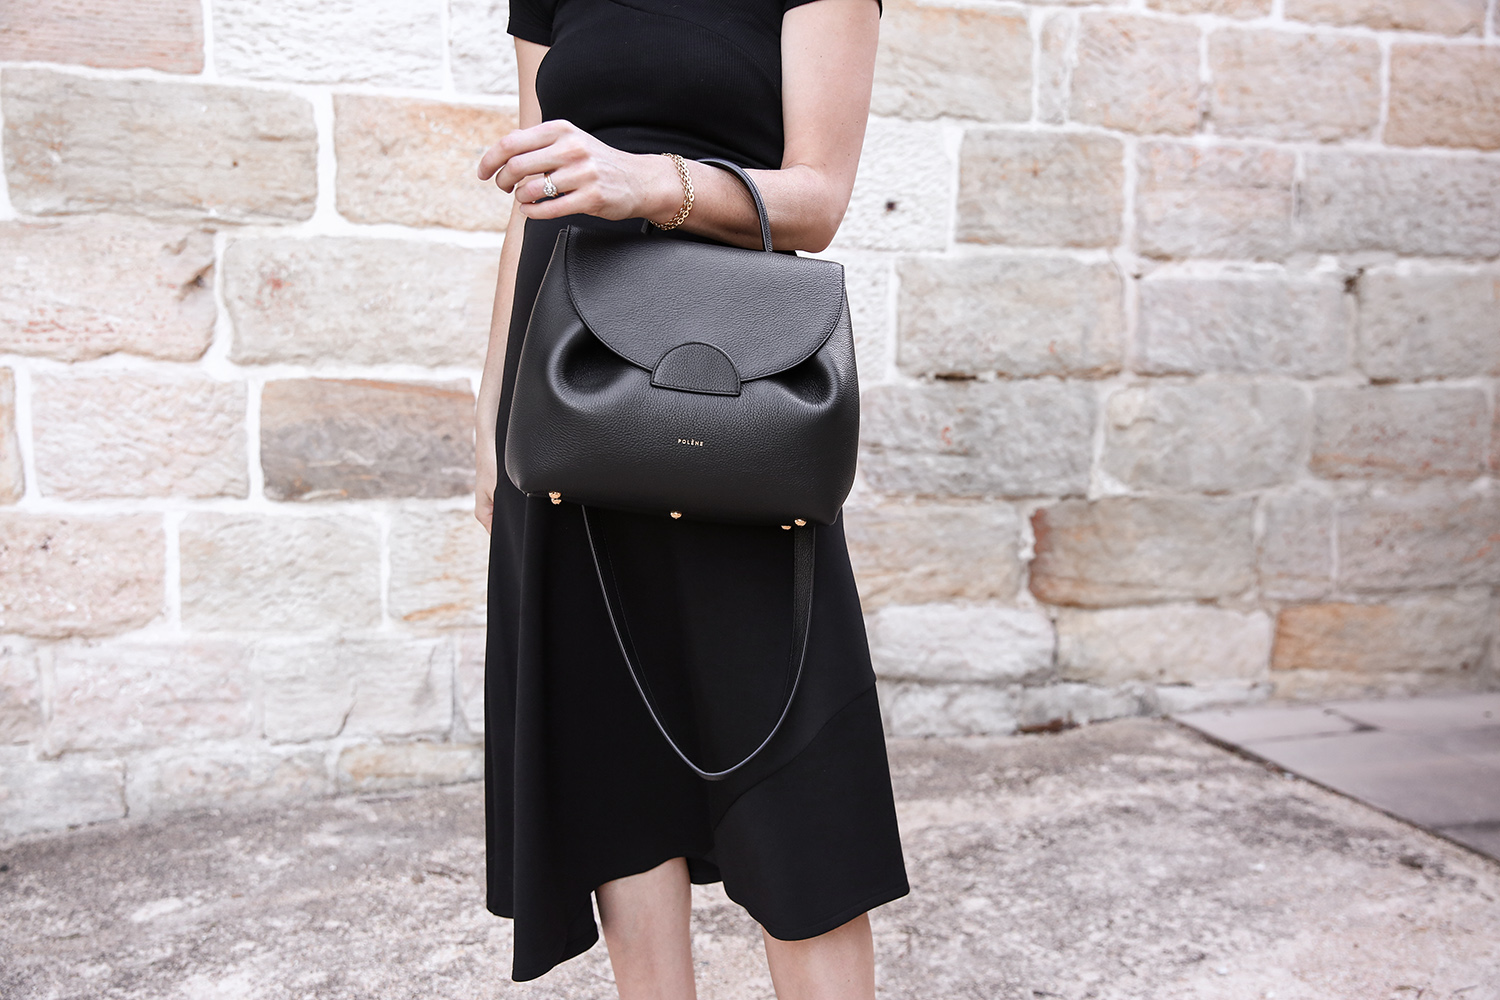 Polene Number One Bag Review - Mademoiselle